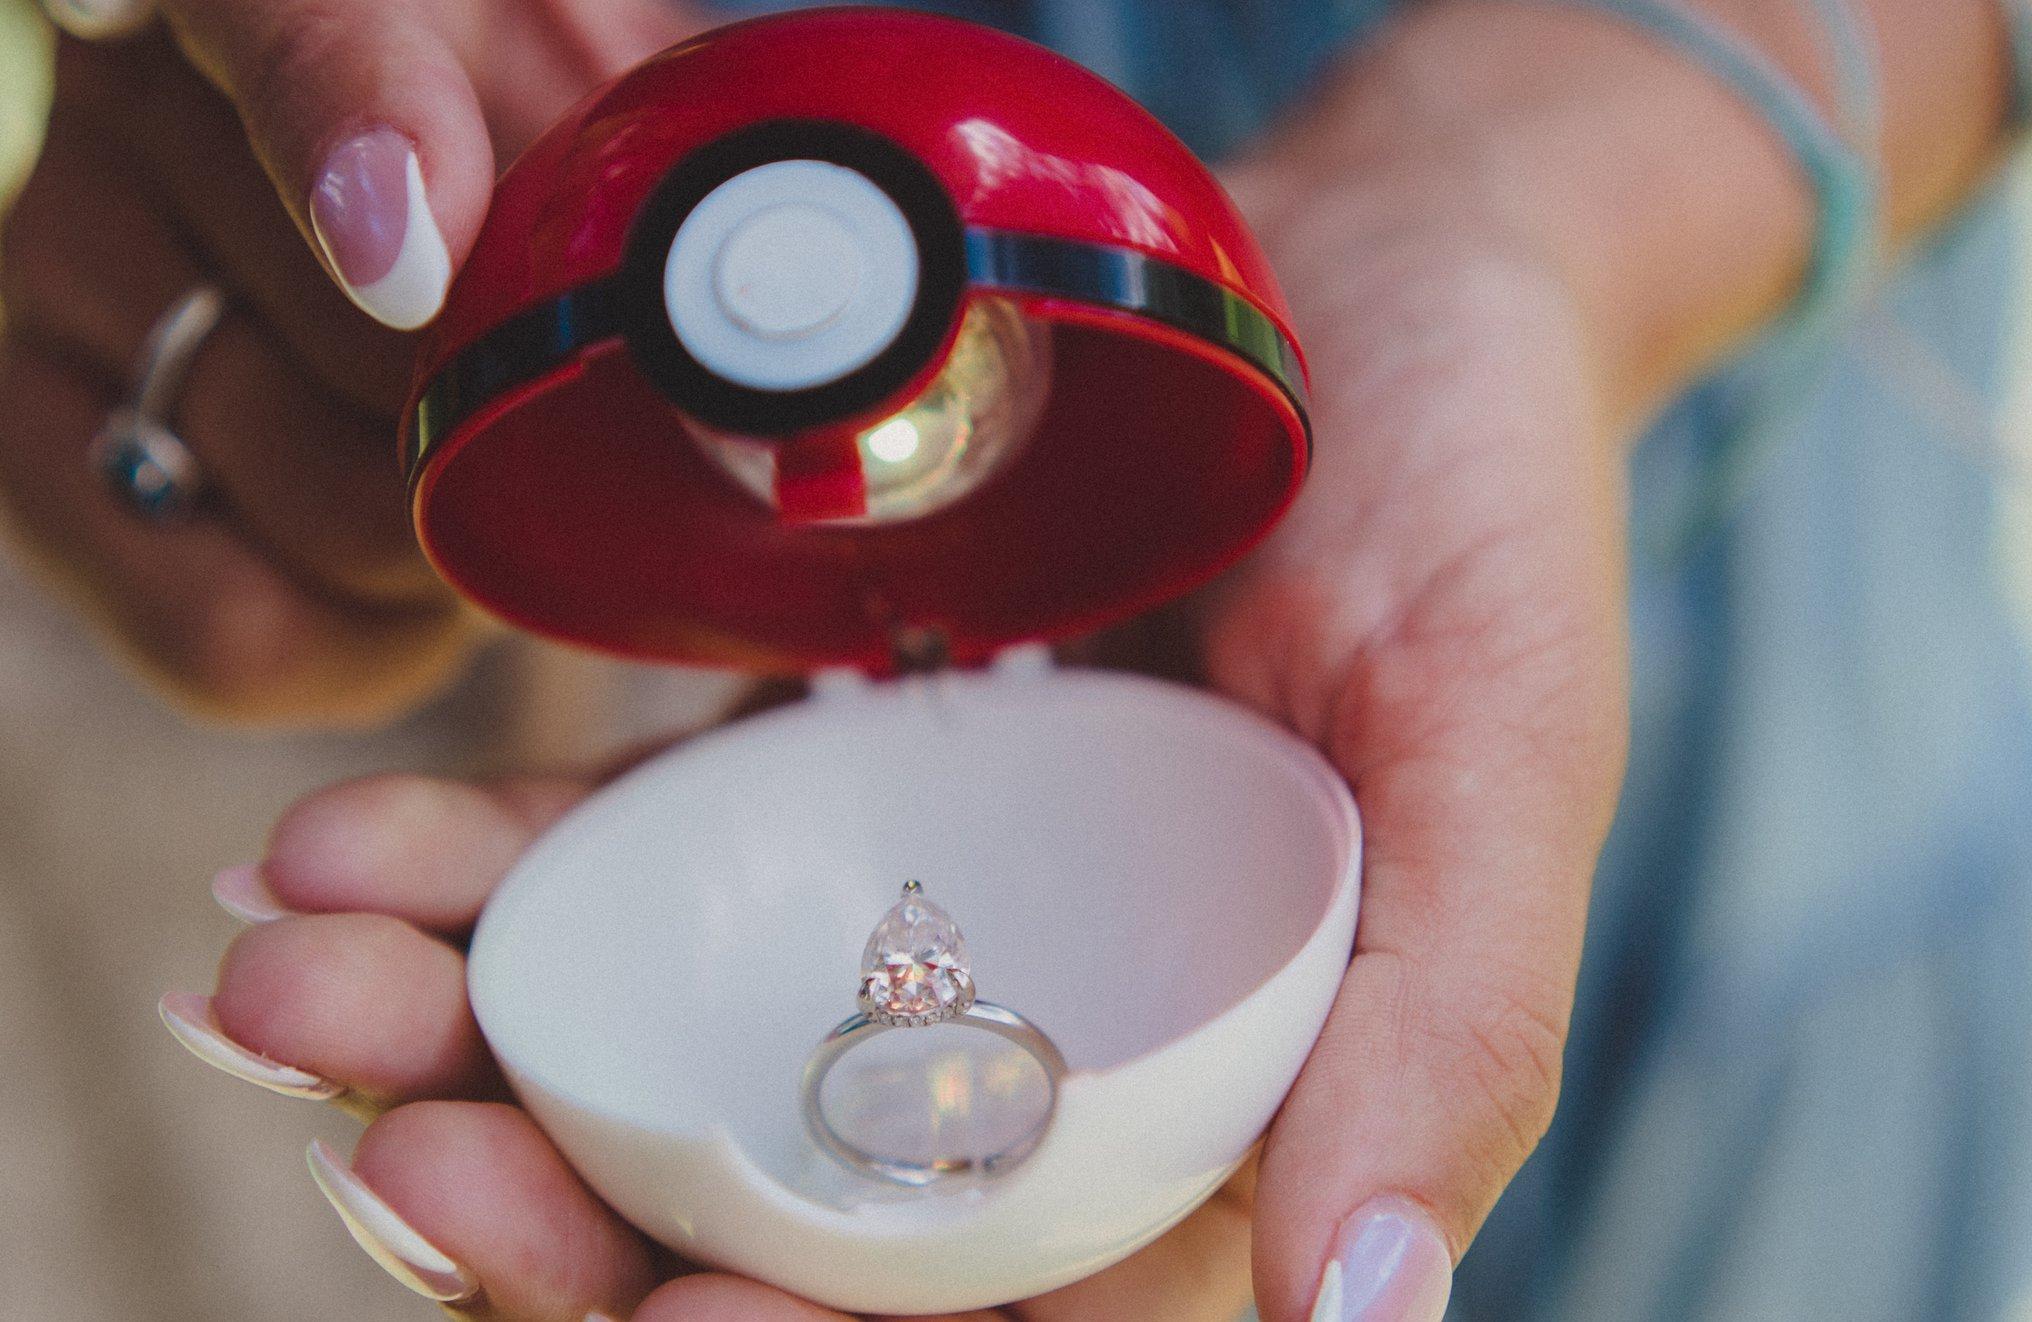 Kelsi's engagement ring in a PokéBall